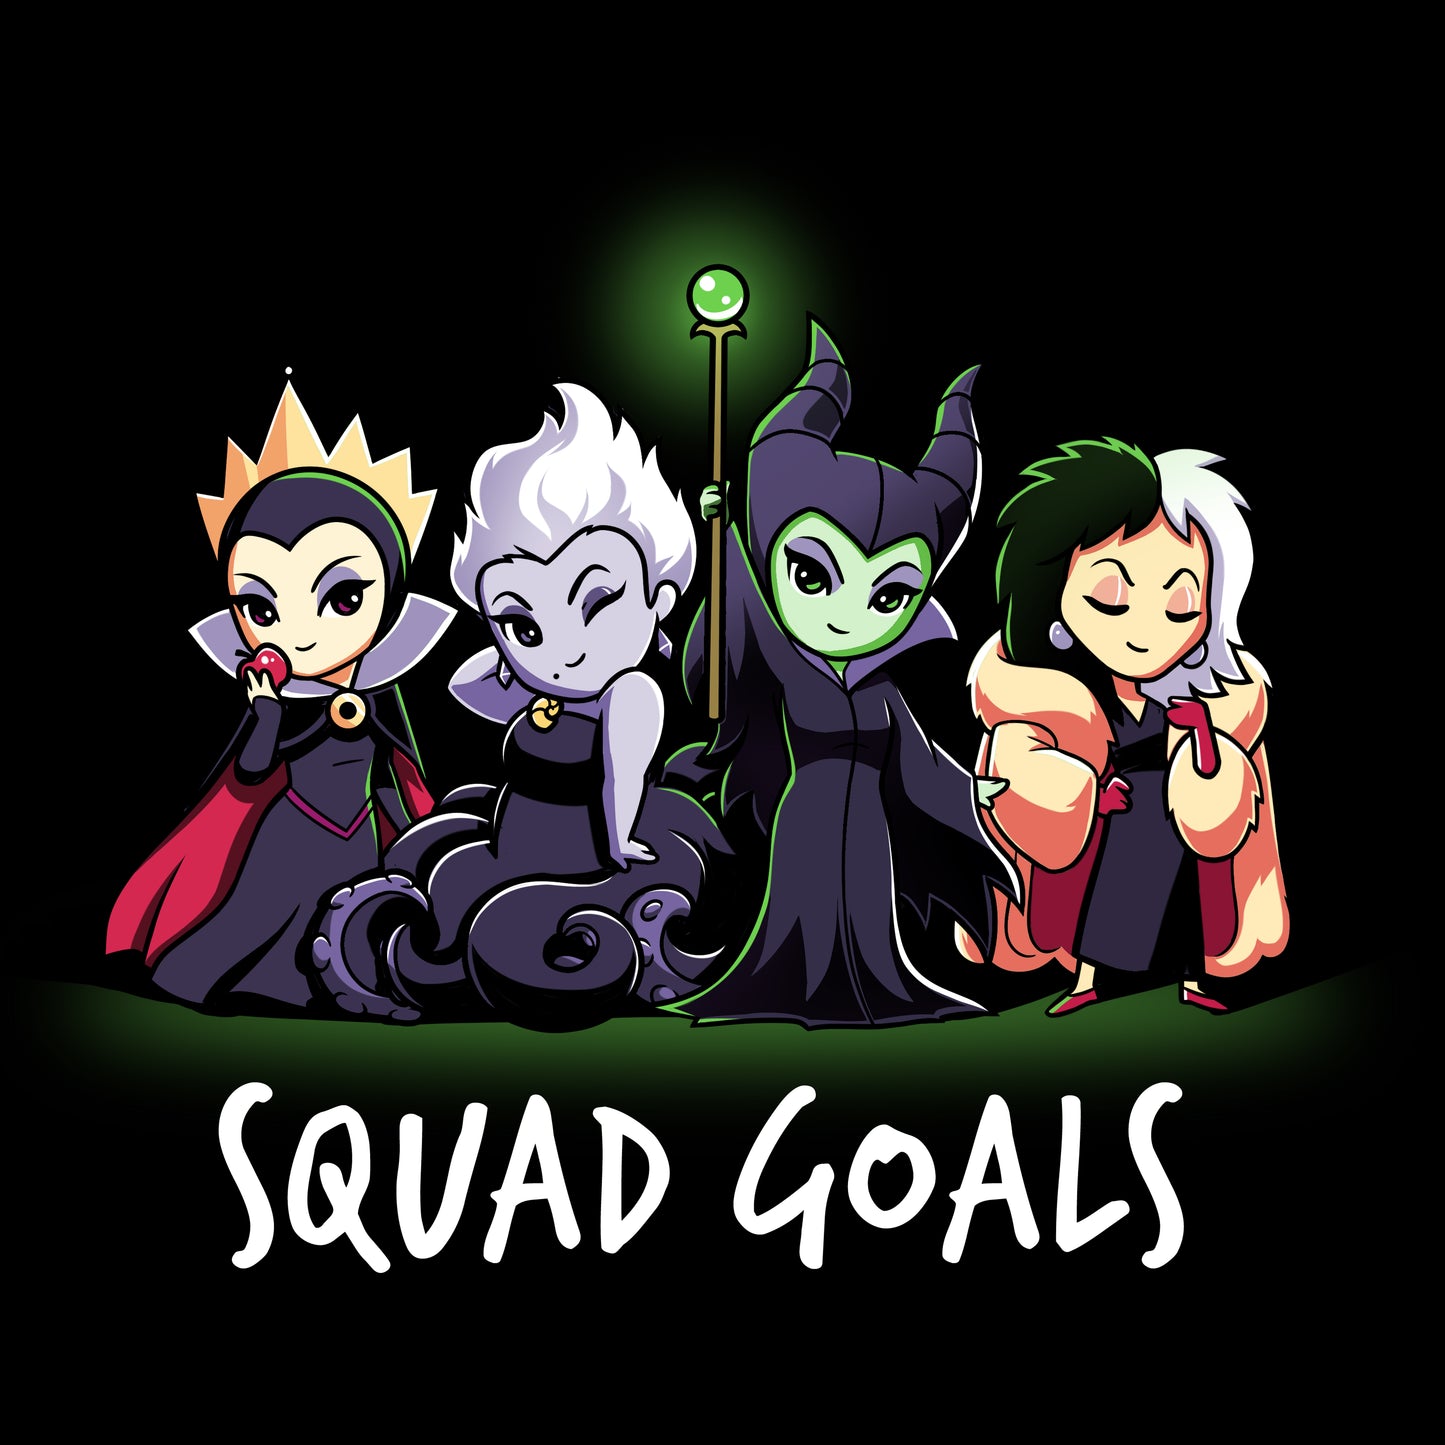 A Disney Officially Licensed product with the Disney Villain Squad Goals.